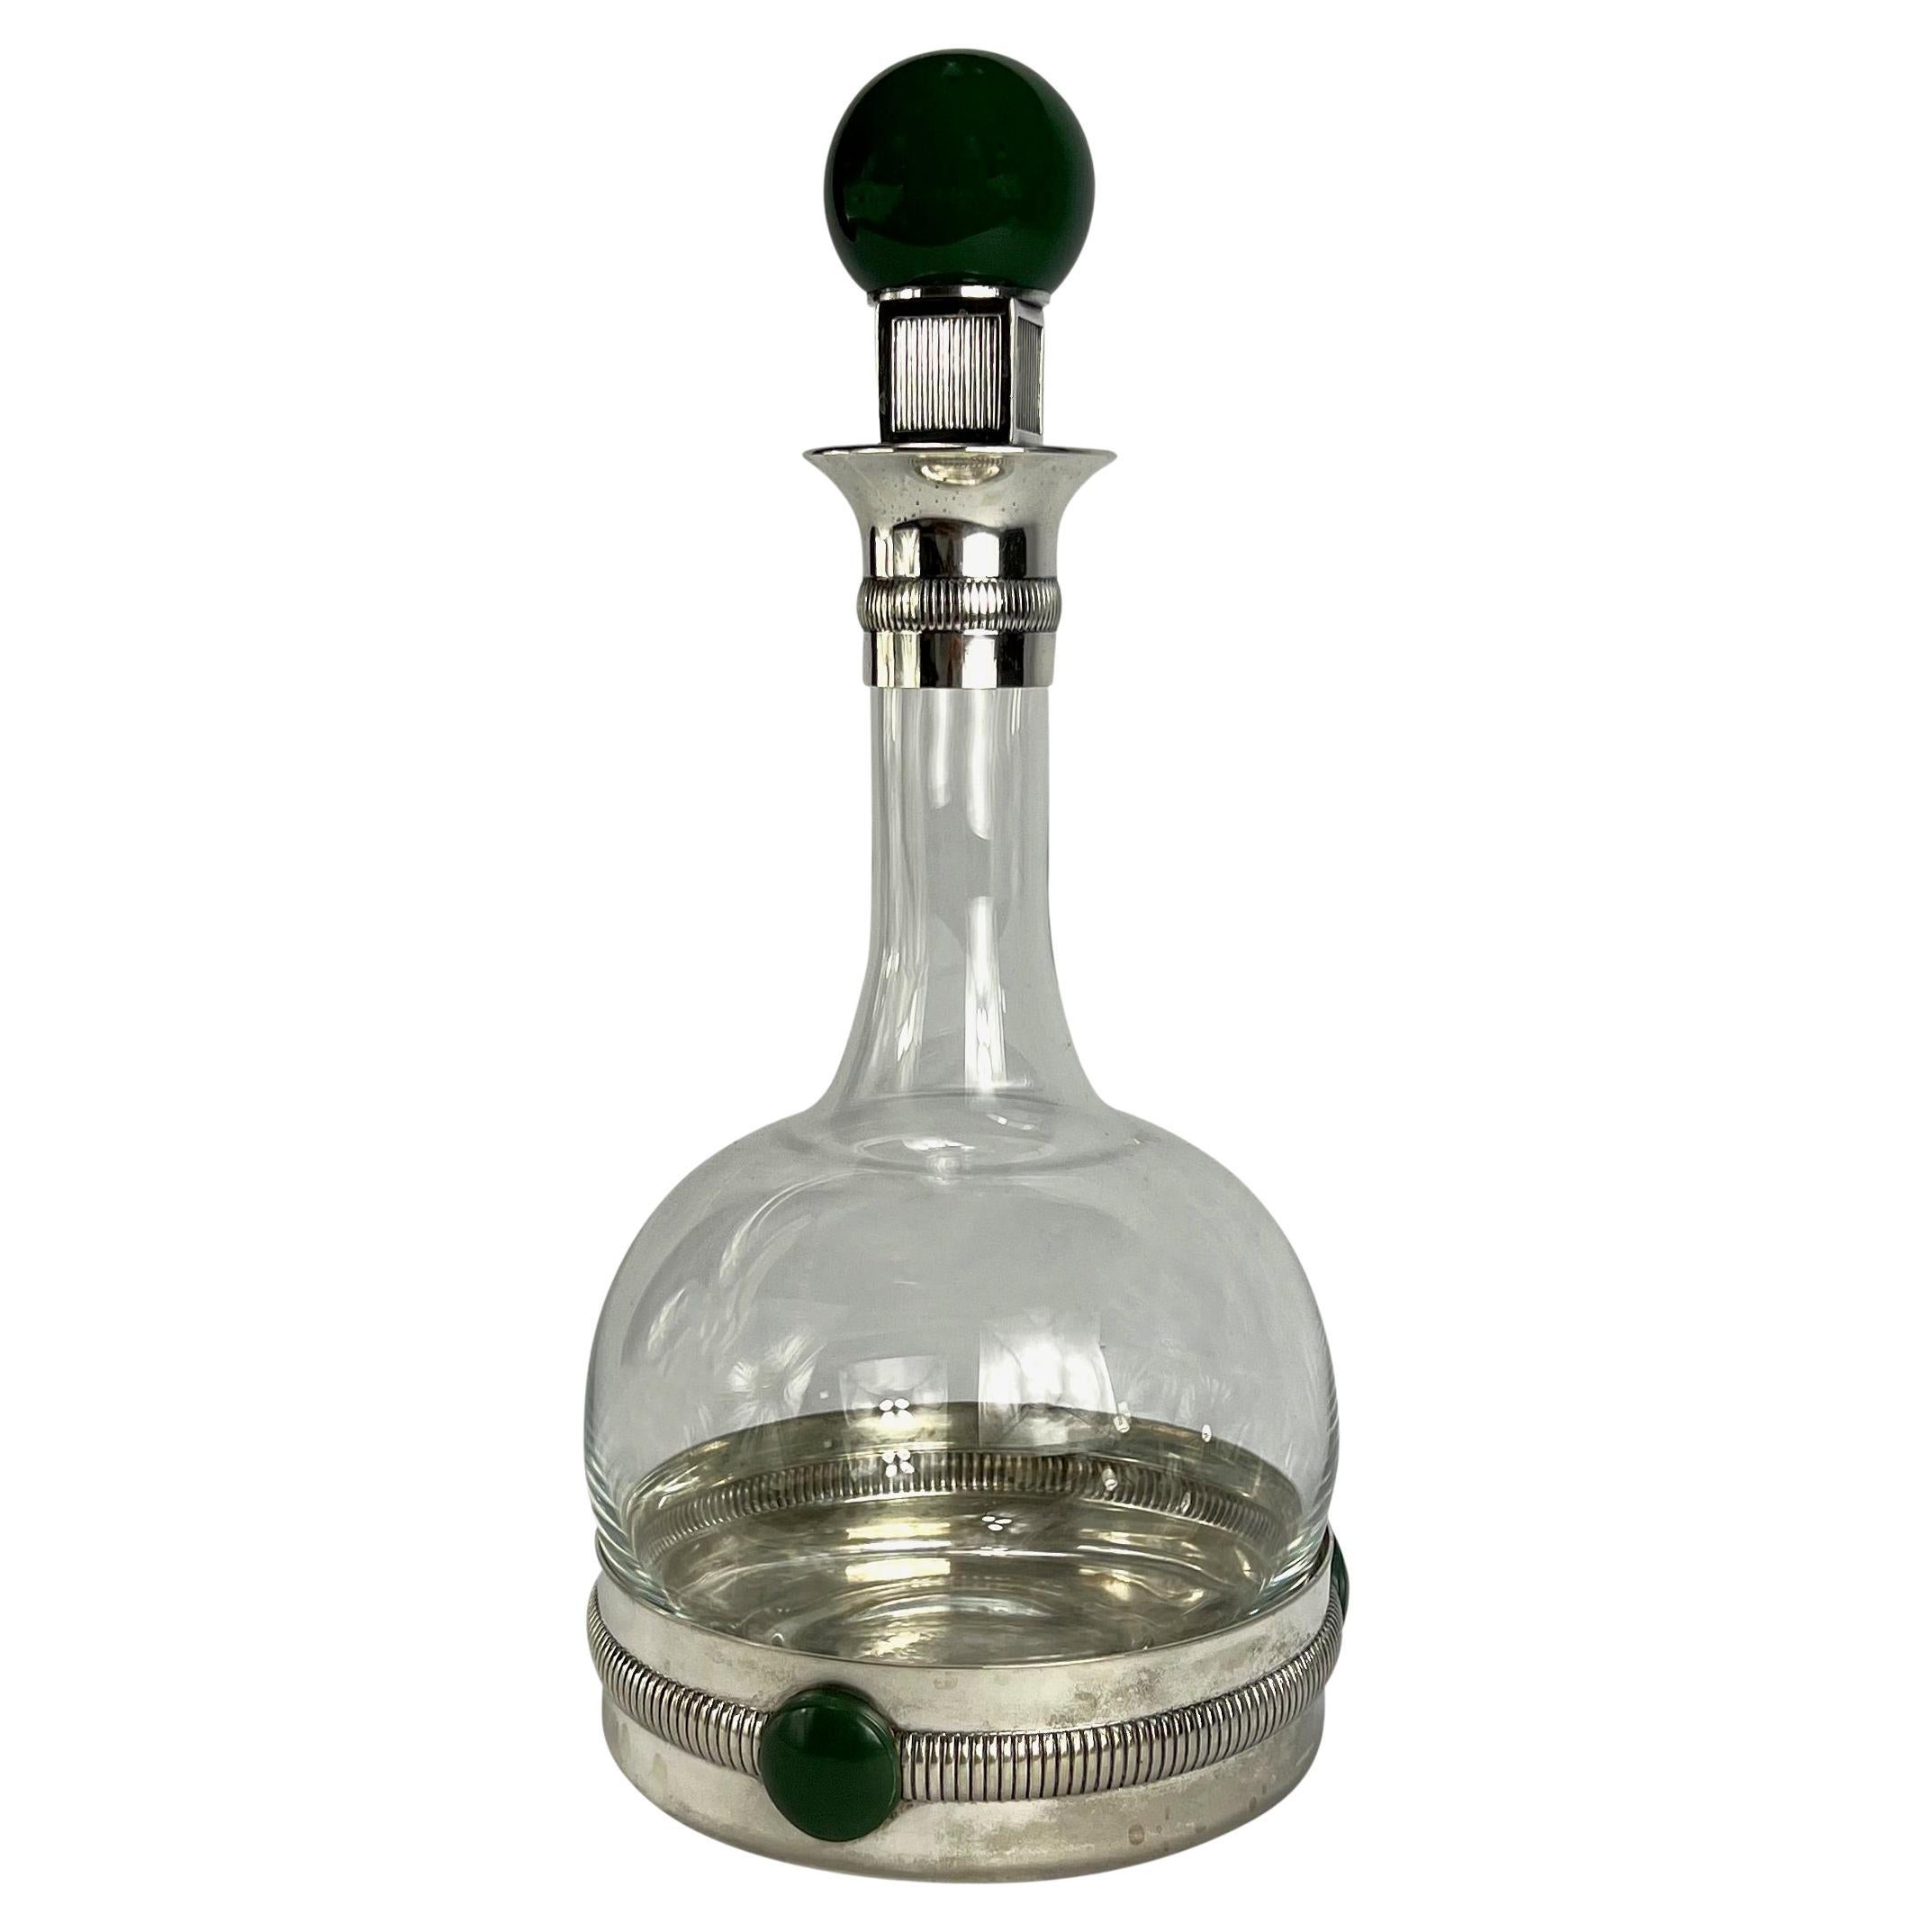 Presenting a beautiful silver plate Gucci decanter. From the 1970s, this beautiful decanter features a silver-tone base, rim, and stopper with deep green accents. Add this insane piece of vintage Gucci to your bar set! 

Approximate Measurements: